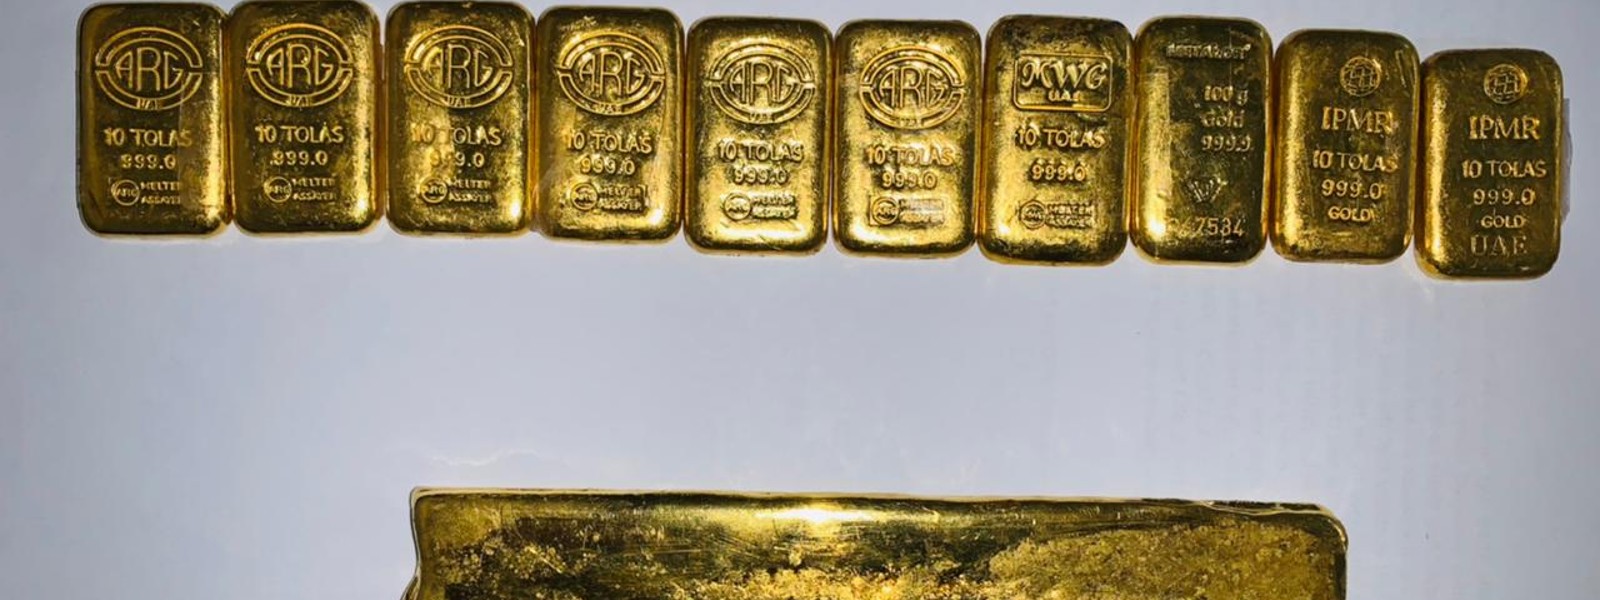 Rs.43 Mn worth of Gold confiscated by Customs